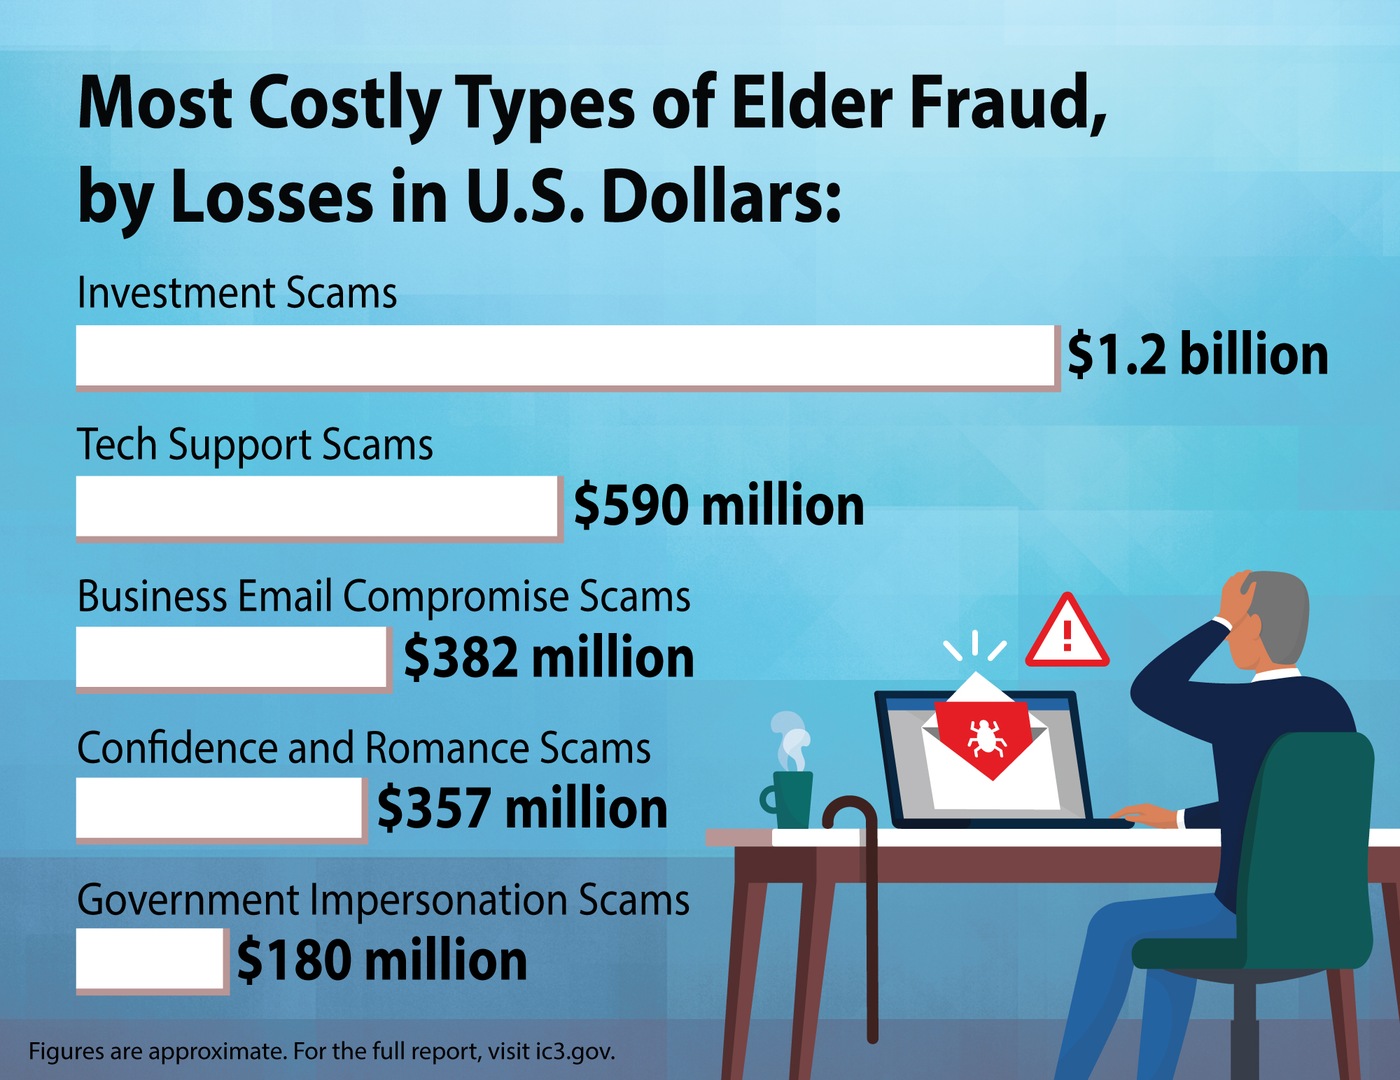 This infographic shows how much money Americans aged 60 and older lost to different types of fraud in 2023, based on incidents reported to the FBI's Internet Crime Complaint Center that year. Figures are approximate. For the full 2023 report, visit ic3.gov.